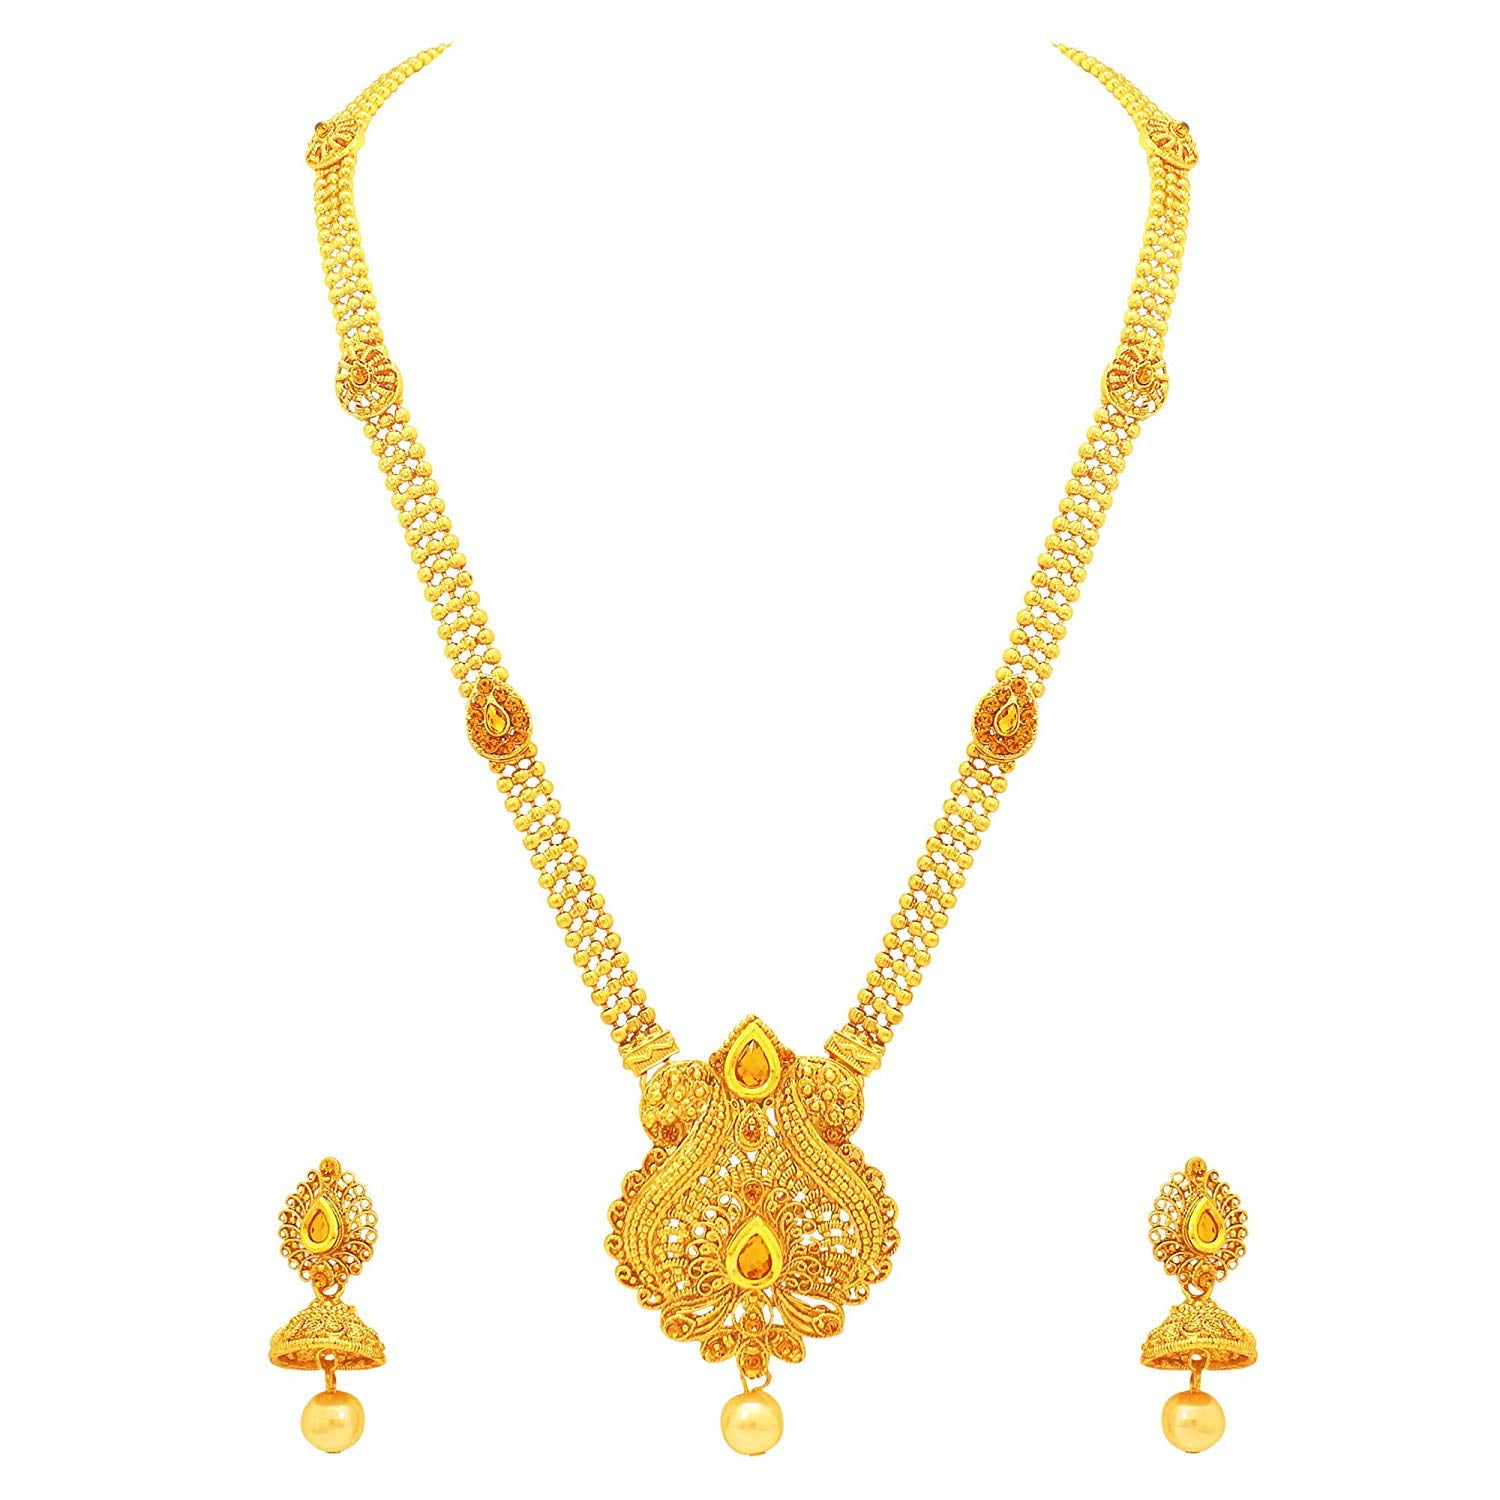 Details about   Jewelry Set Necklace Pendant Earrings Zirconia White 750er Gold 18K Plated S1930 